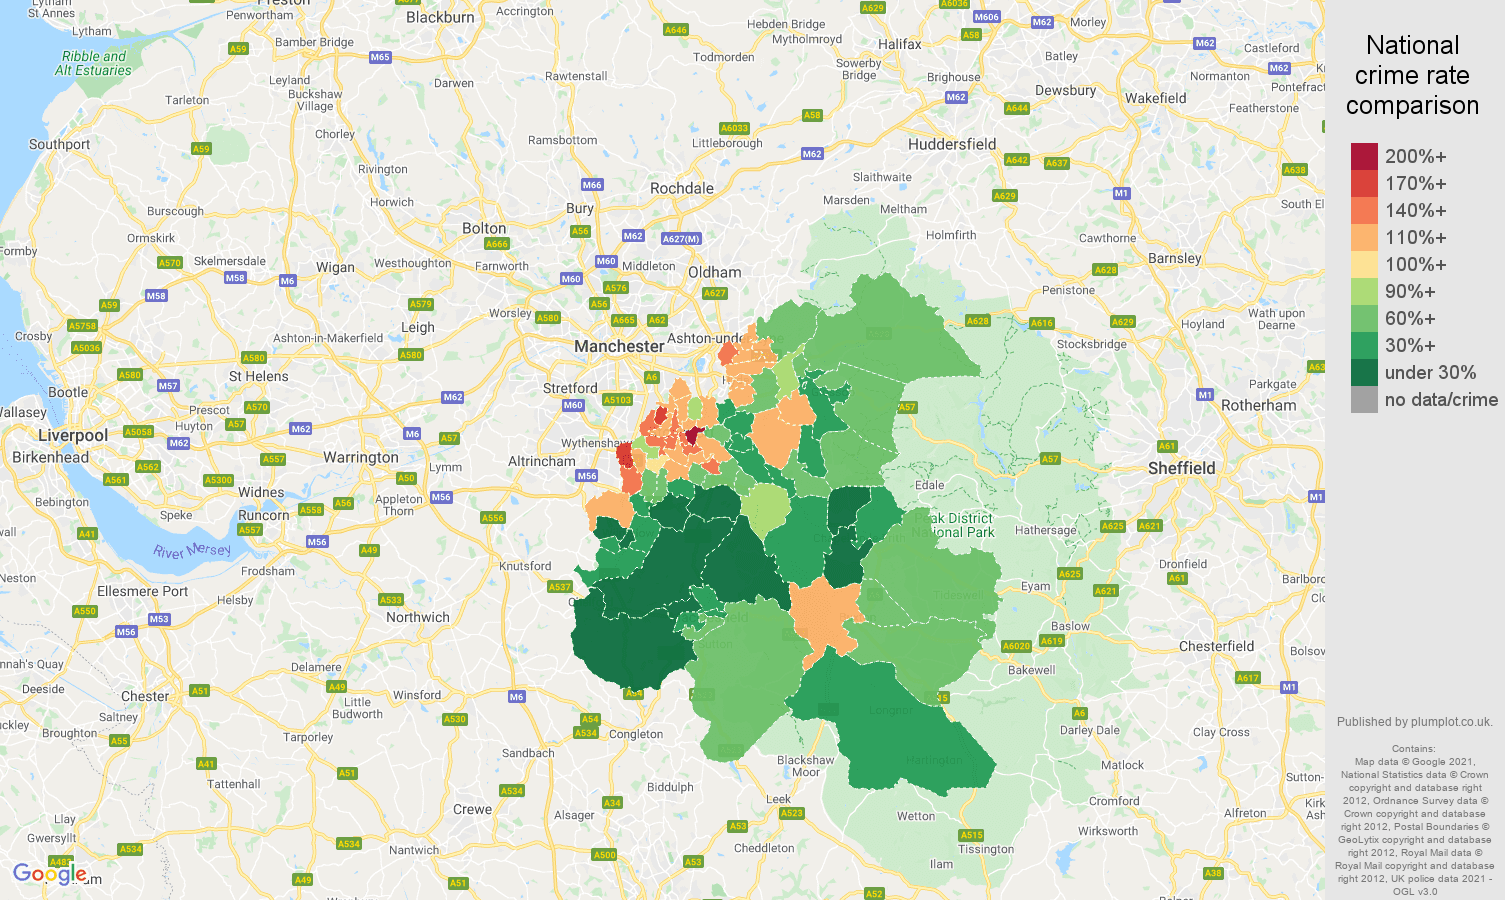 Stockport vehicle crime rate comparison map